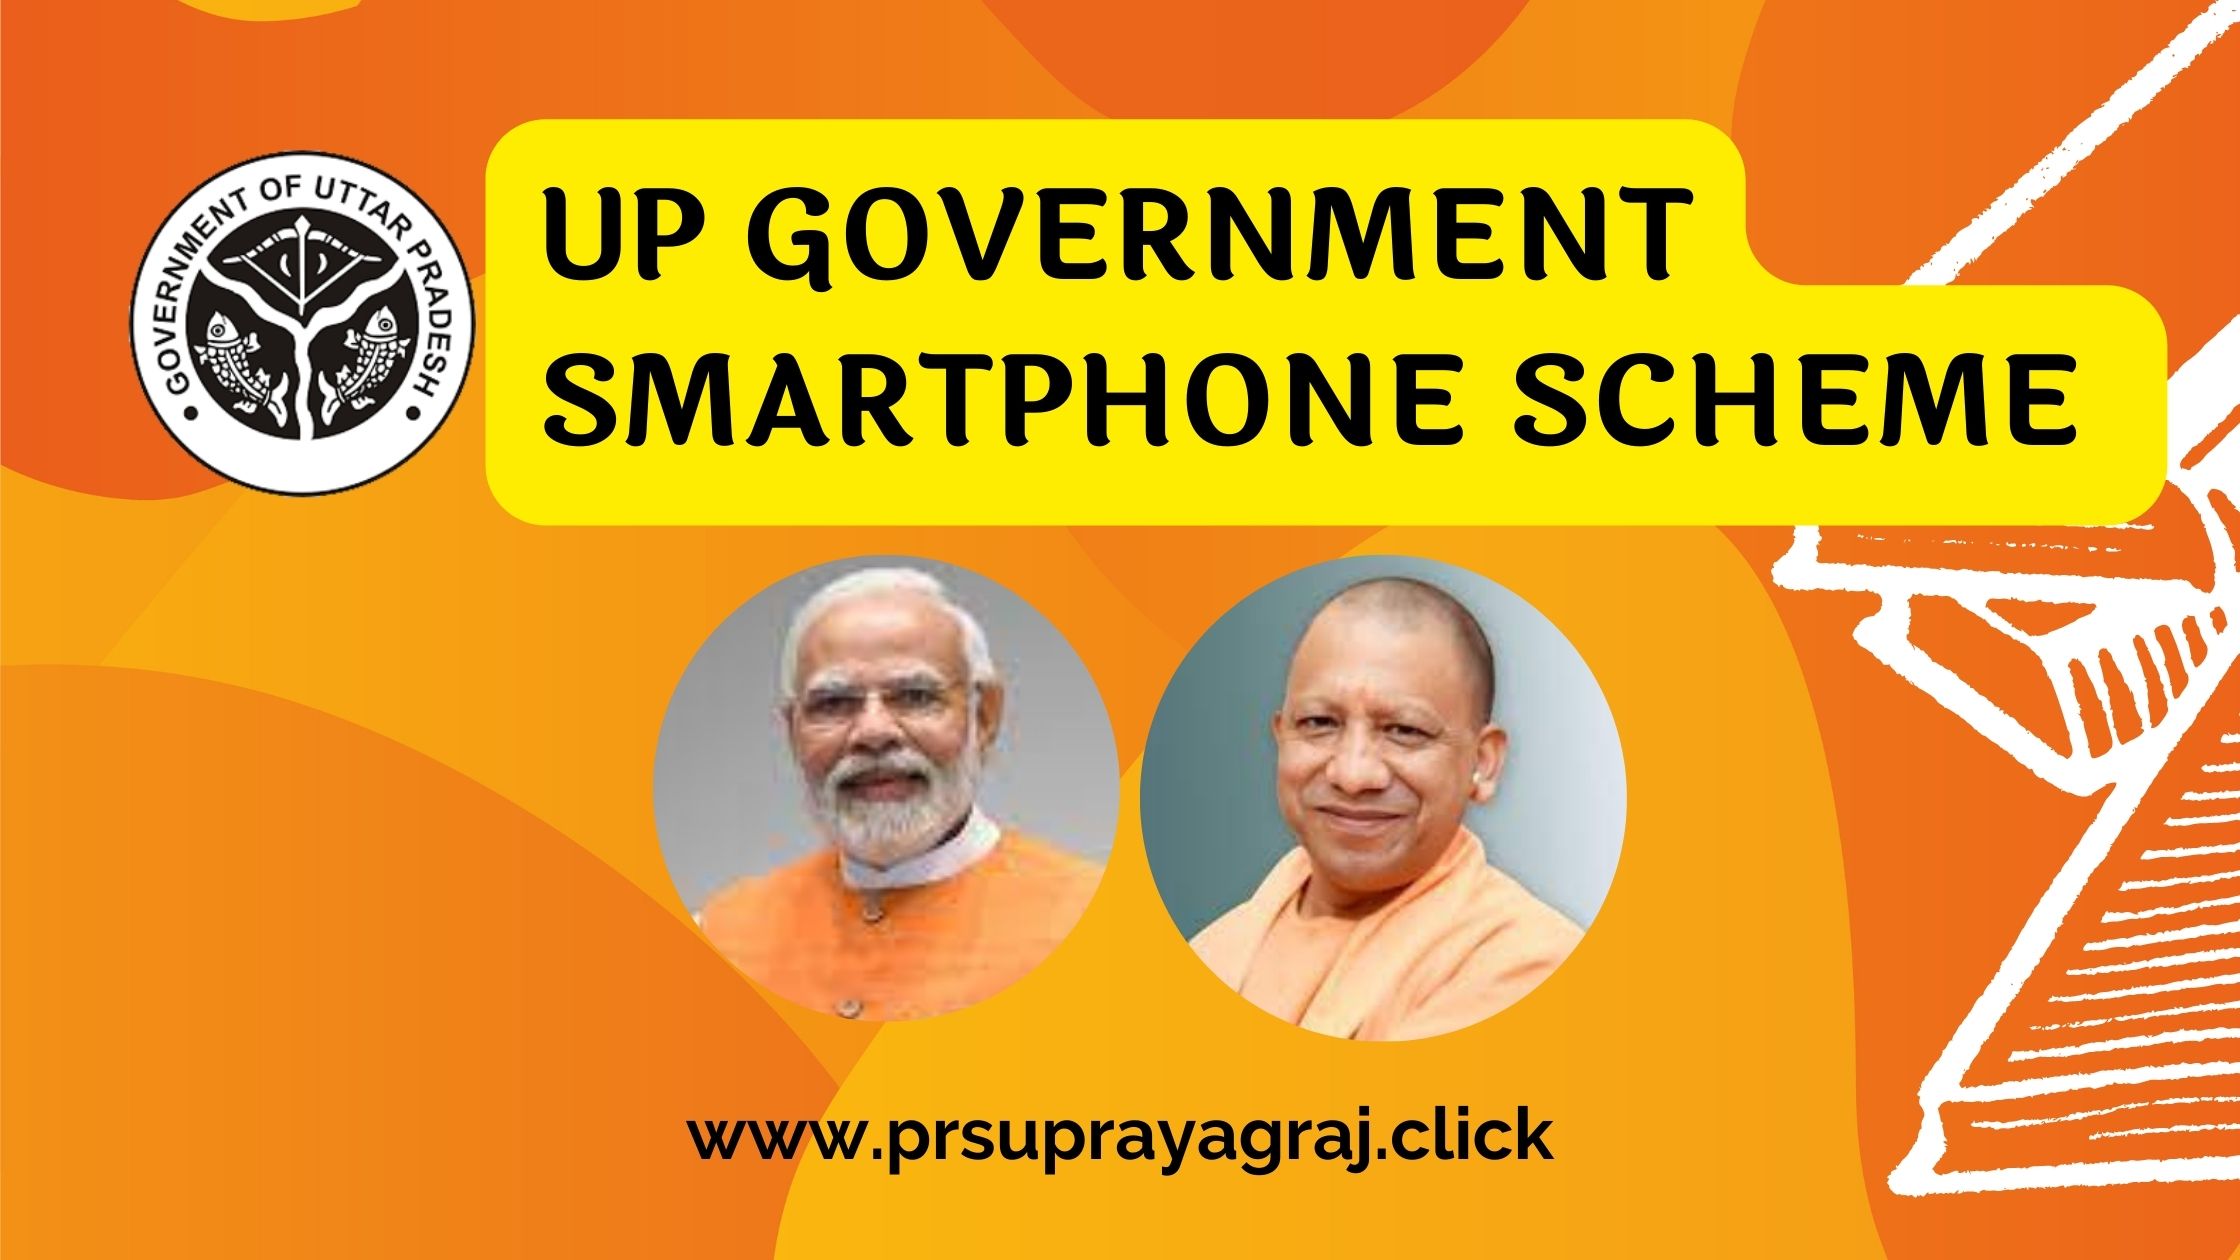 Official Website of Department of IT & Electronics, Uttar Pradesh, India